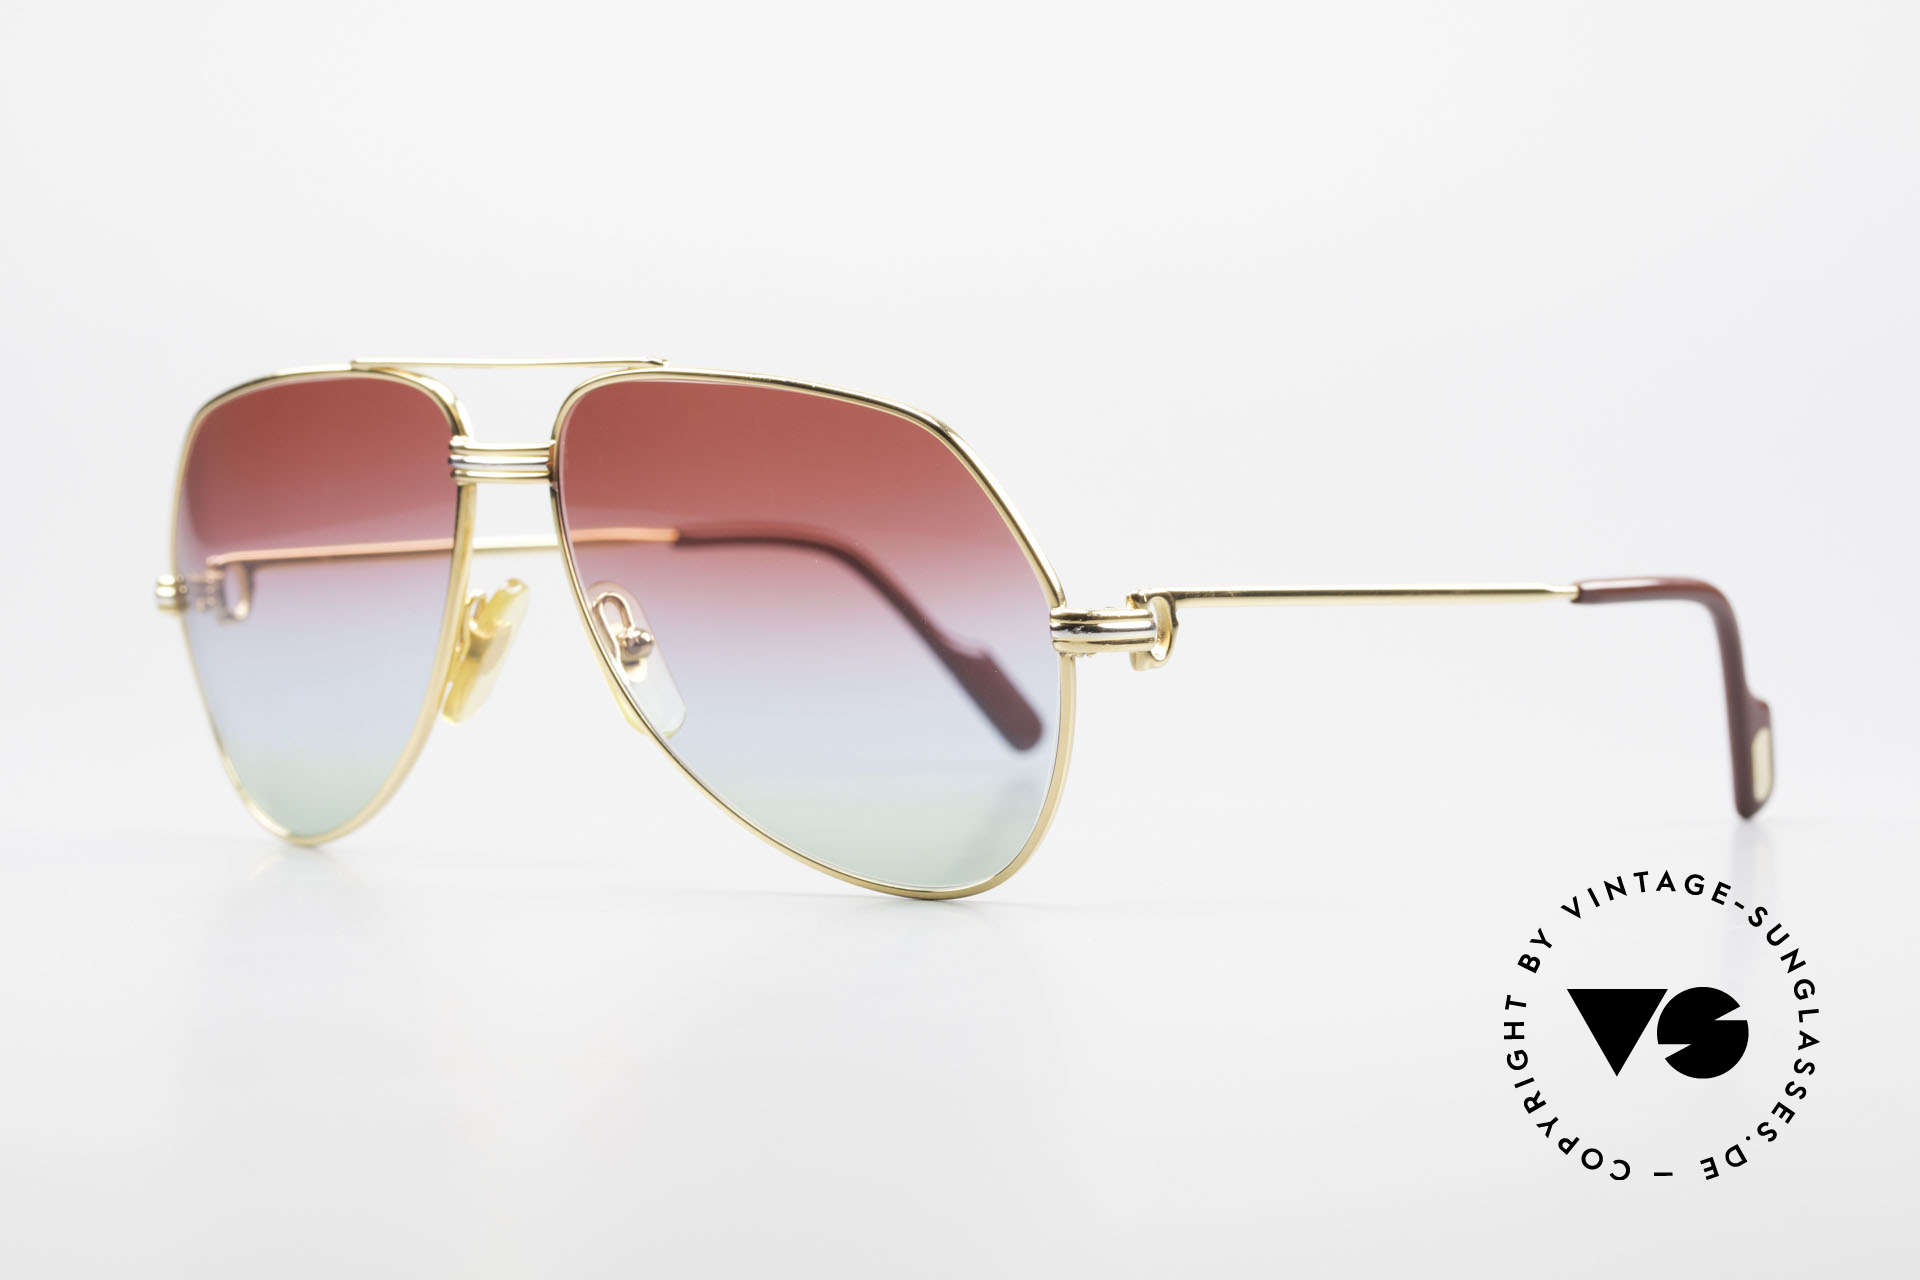 Cartier Vendome LC - S 1980's Sunglasses Tricolored, this pair (Louis Cartier decor): in SMALL size 56-14, 130, Made for Men and Women